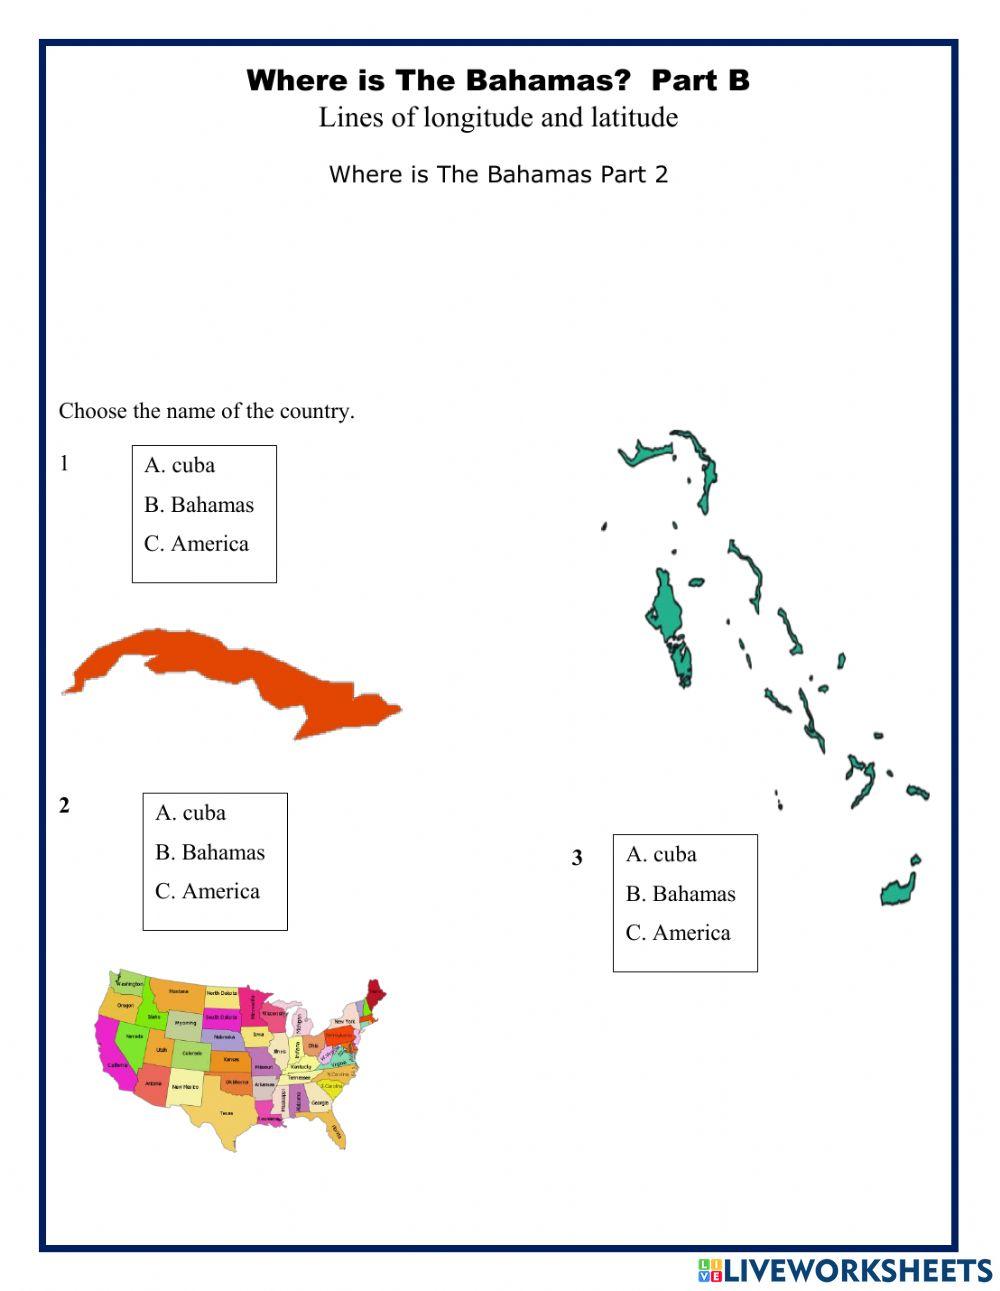 Where is The Bahamas Part 2